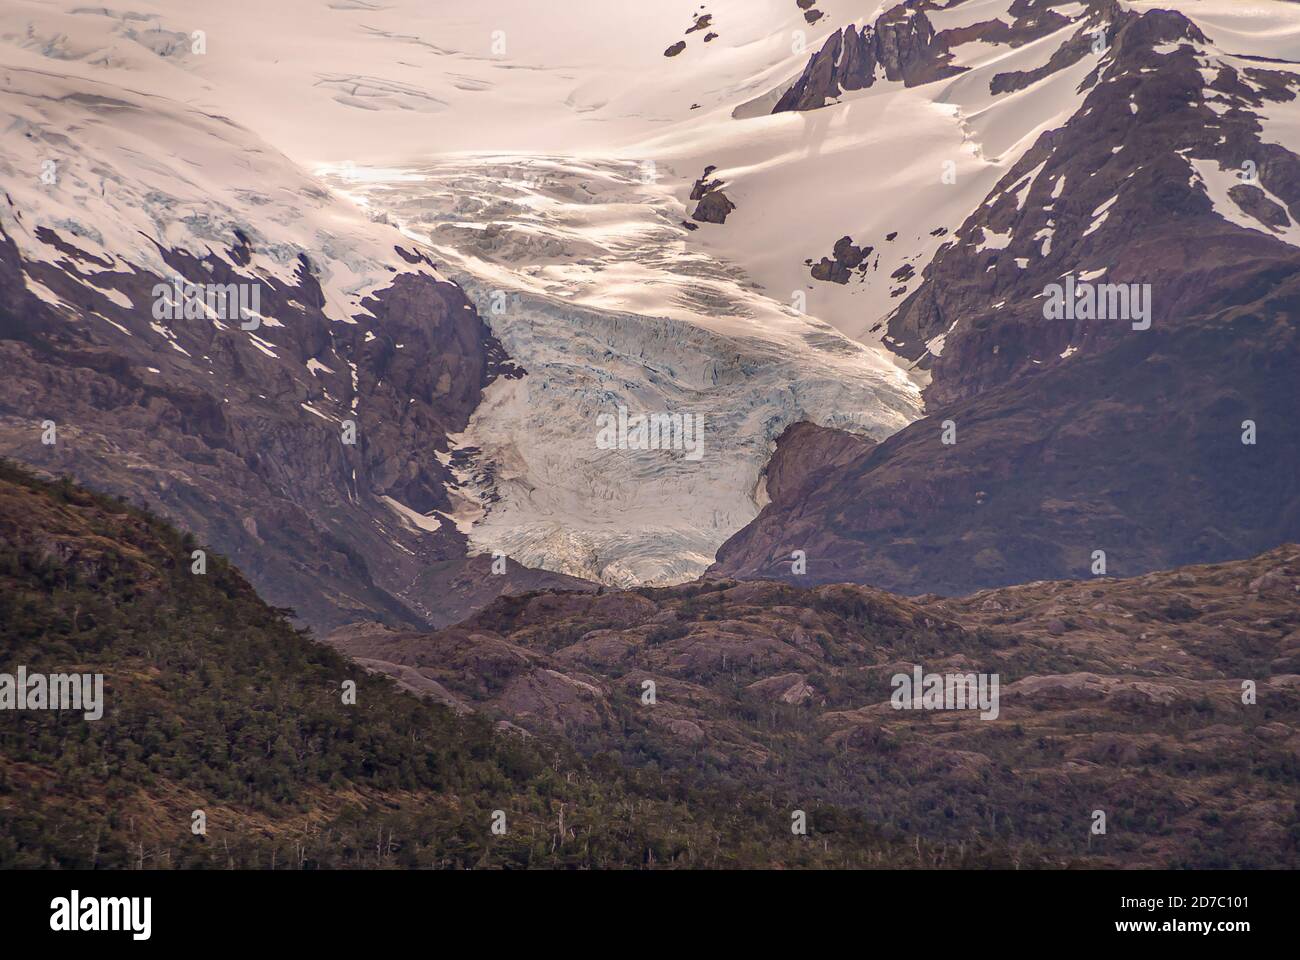 Sarmiento Channel, Chile - December 11, 2008: Closeup of Amalia Glacier above belt of brown rocks and green foliage. Stock Photo